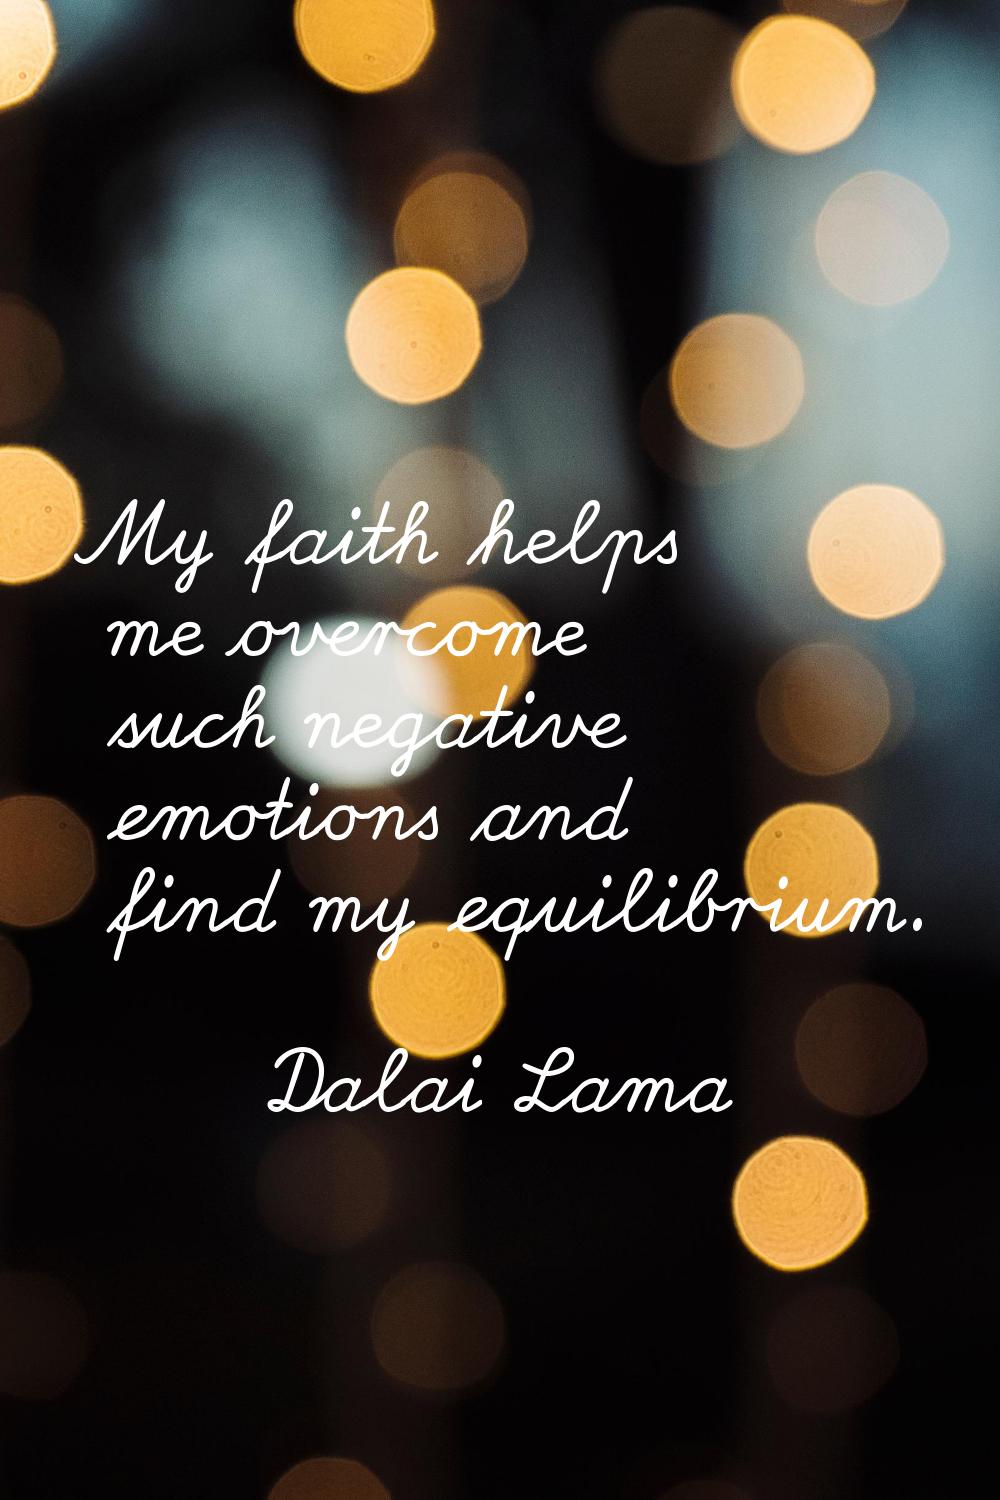 My faith helps me overcome such negative emotions and find my equilibrium.